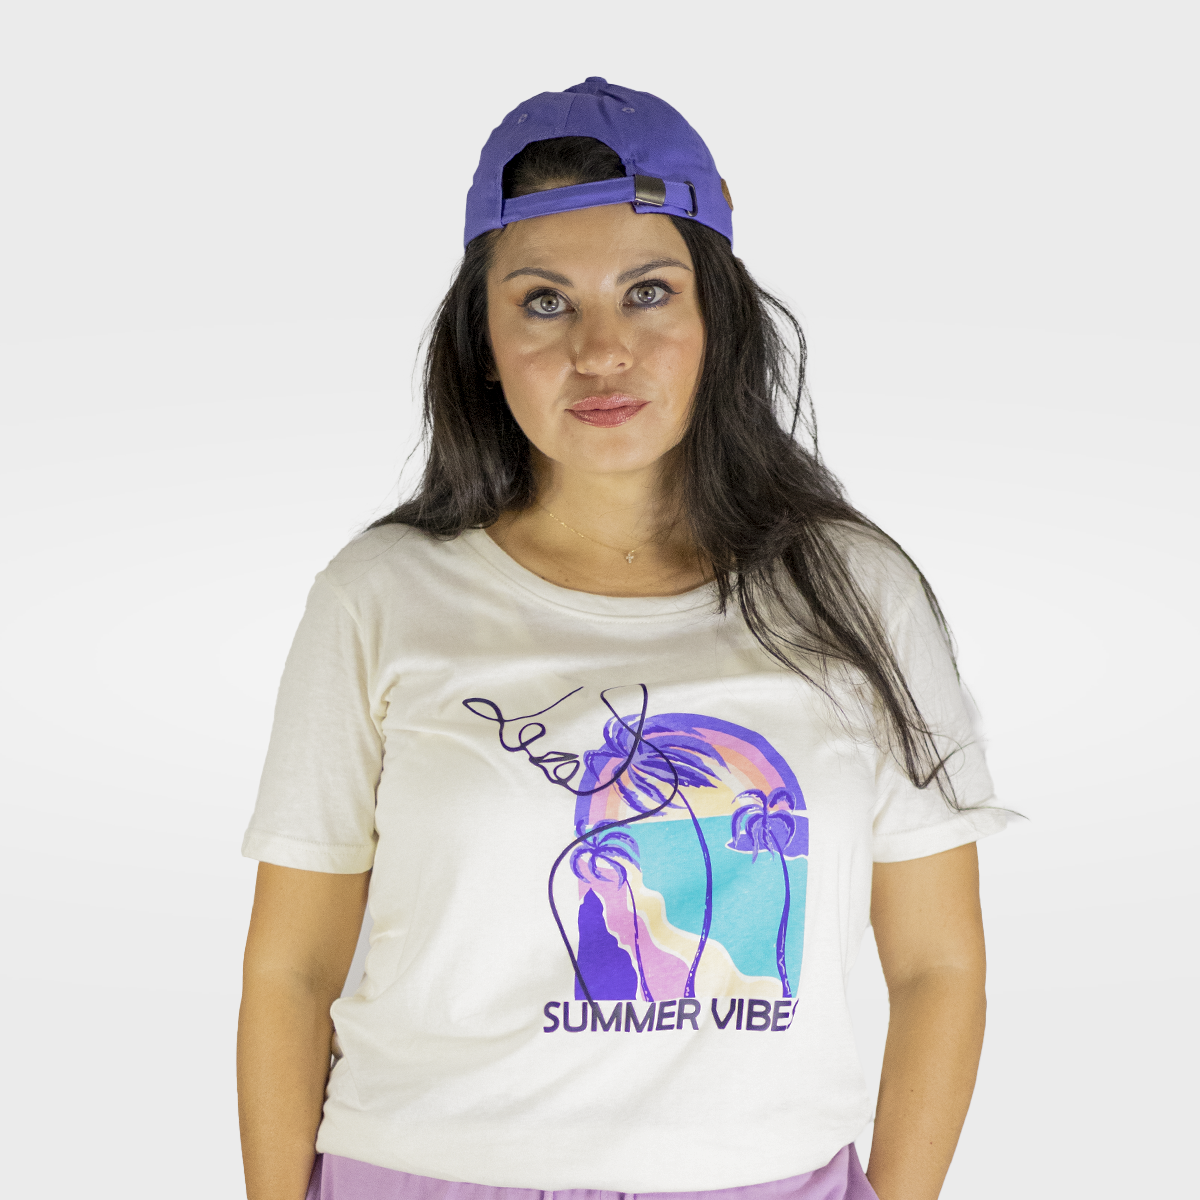 Graphic T-Shirt with SUMMER VIBES Design Perfect for Beach Days